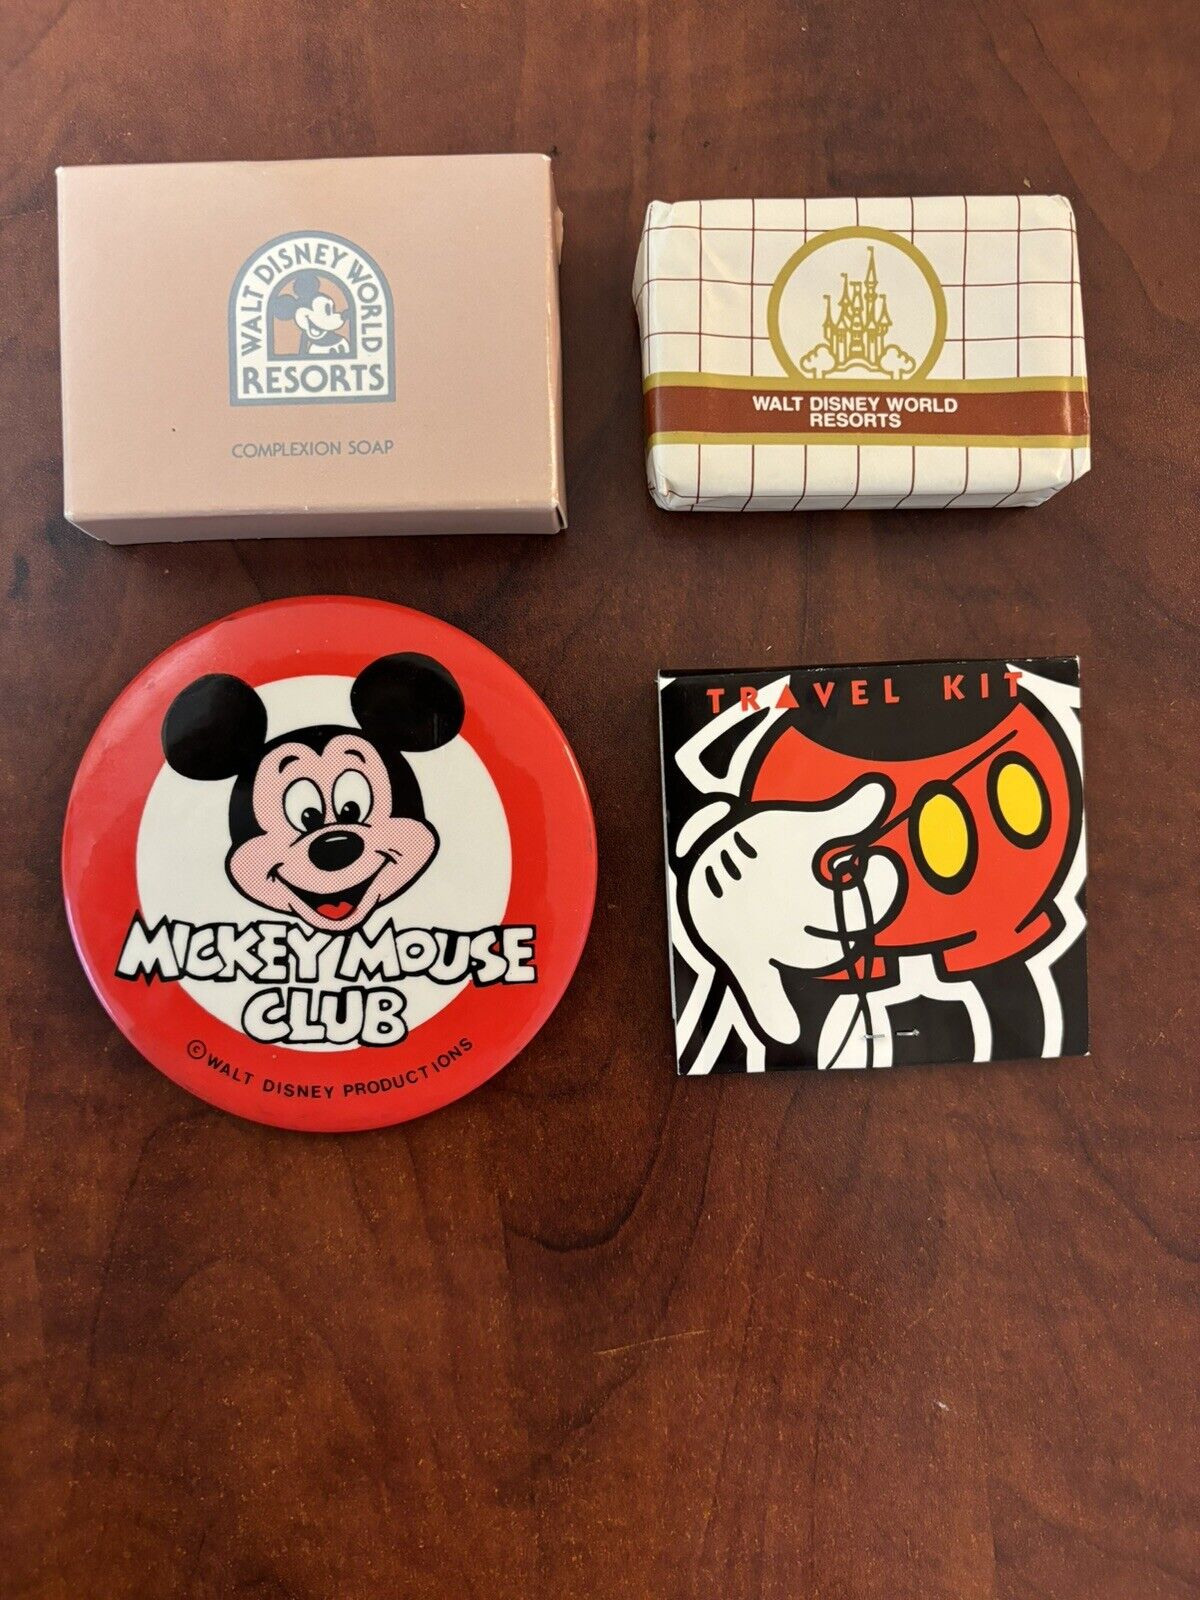 Vintage Walt Disney World Collectibles - 2 hand soaps, travel kit, and button